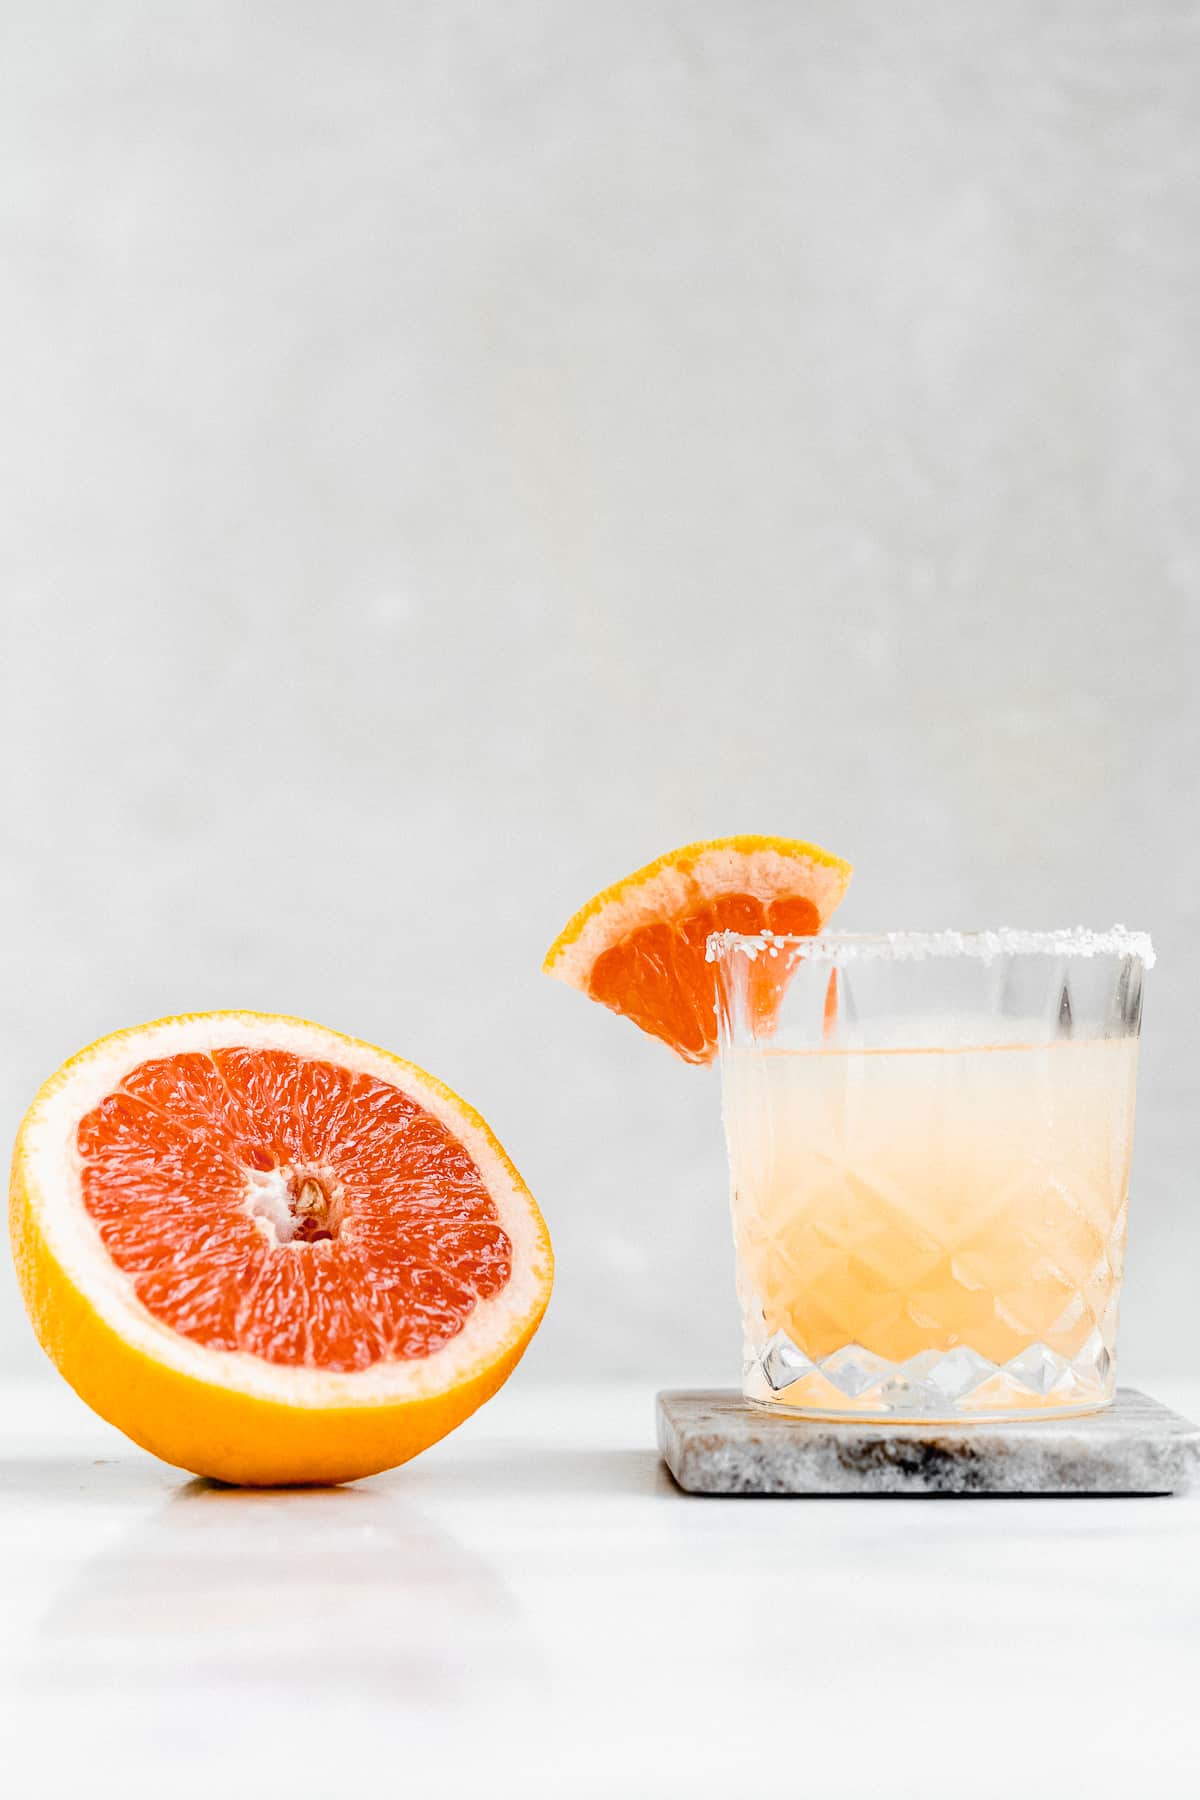 Side view image of a  Skinny Smoky Grapefruit Margarita served in a crystal glass with a salted rim and garnished with a slice of grapefruit.  Half of a grapefruit is laying nearby.  